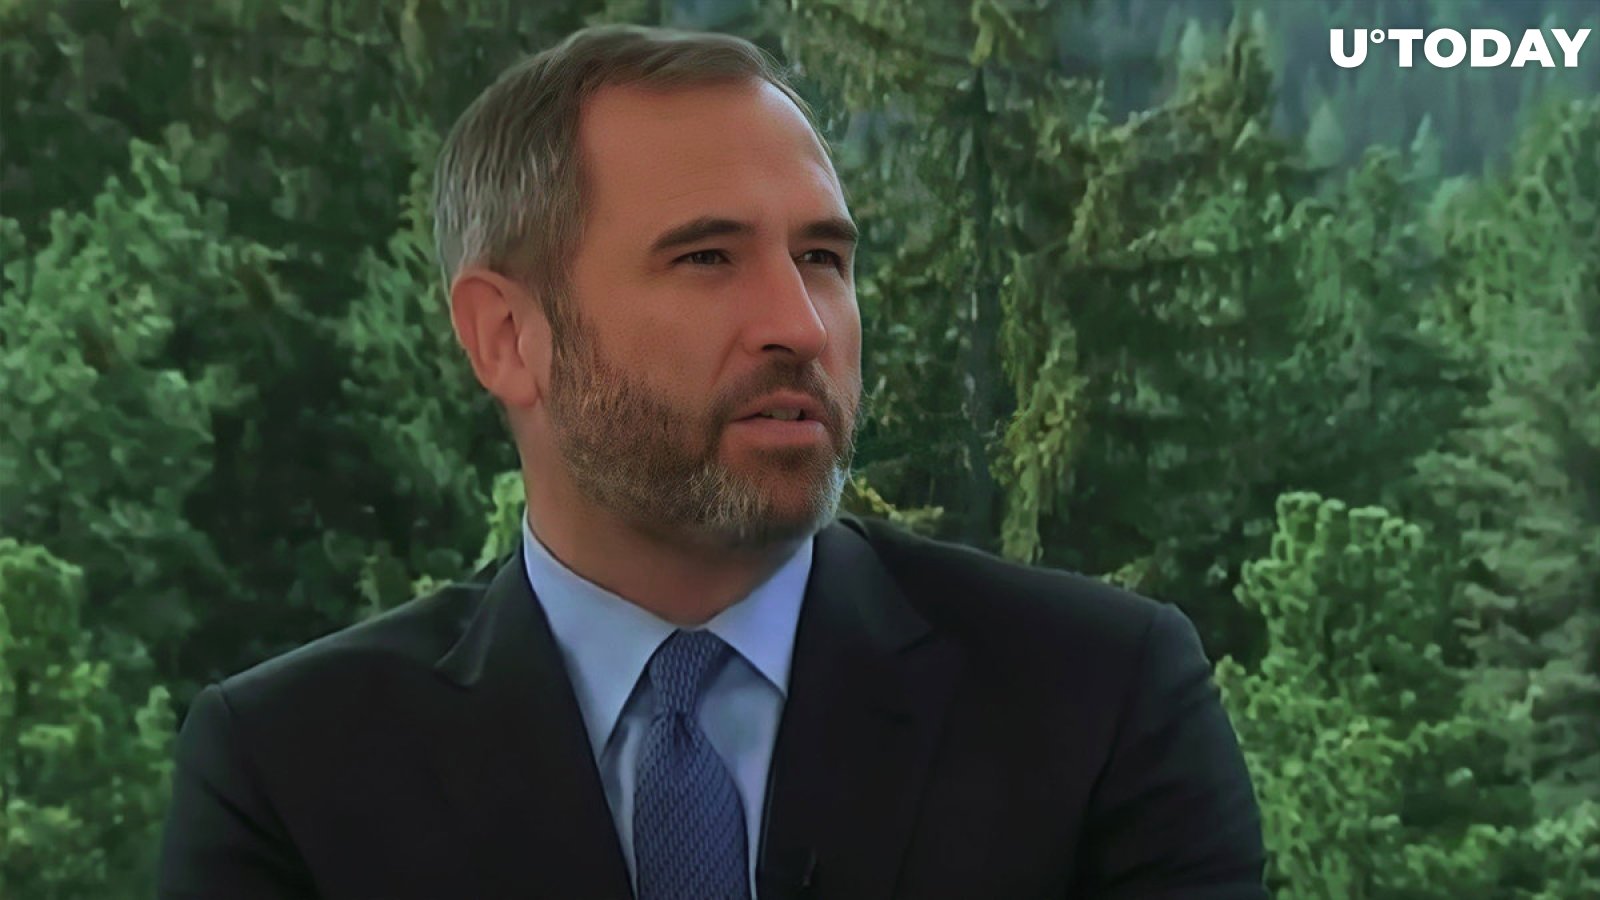 Ripple Is Doing "a Lot Less" Hiring in US, Garlinghouse Says